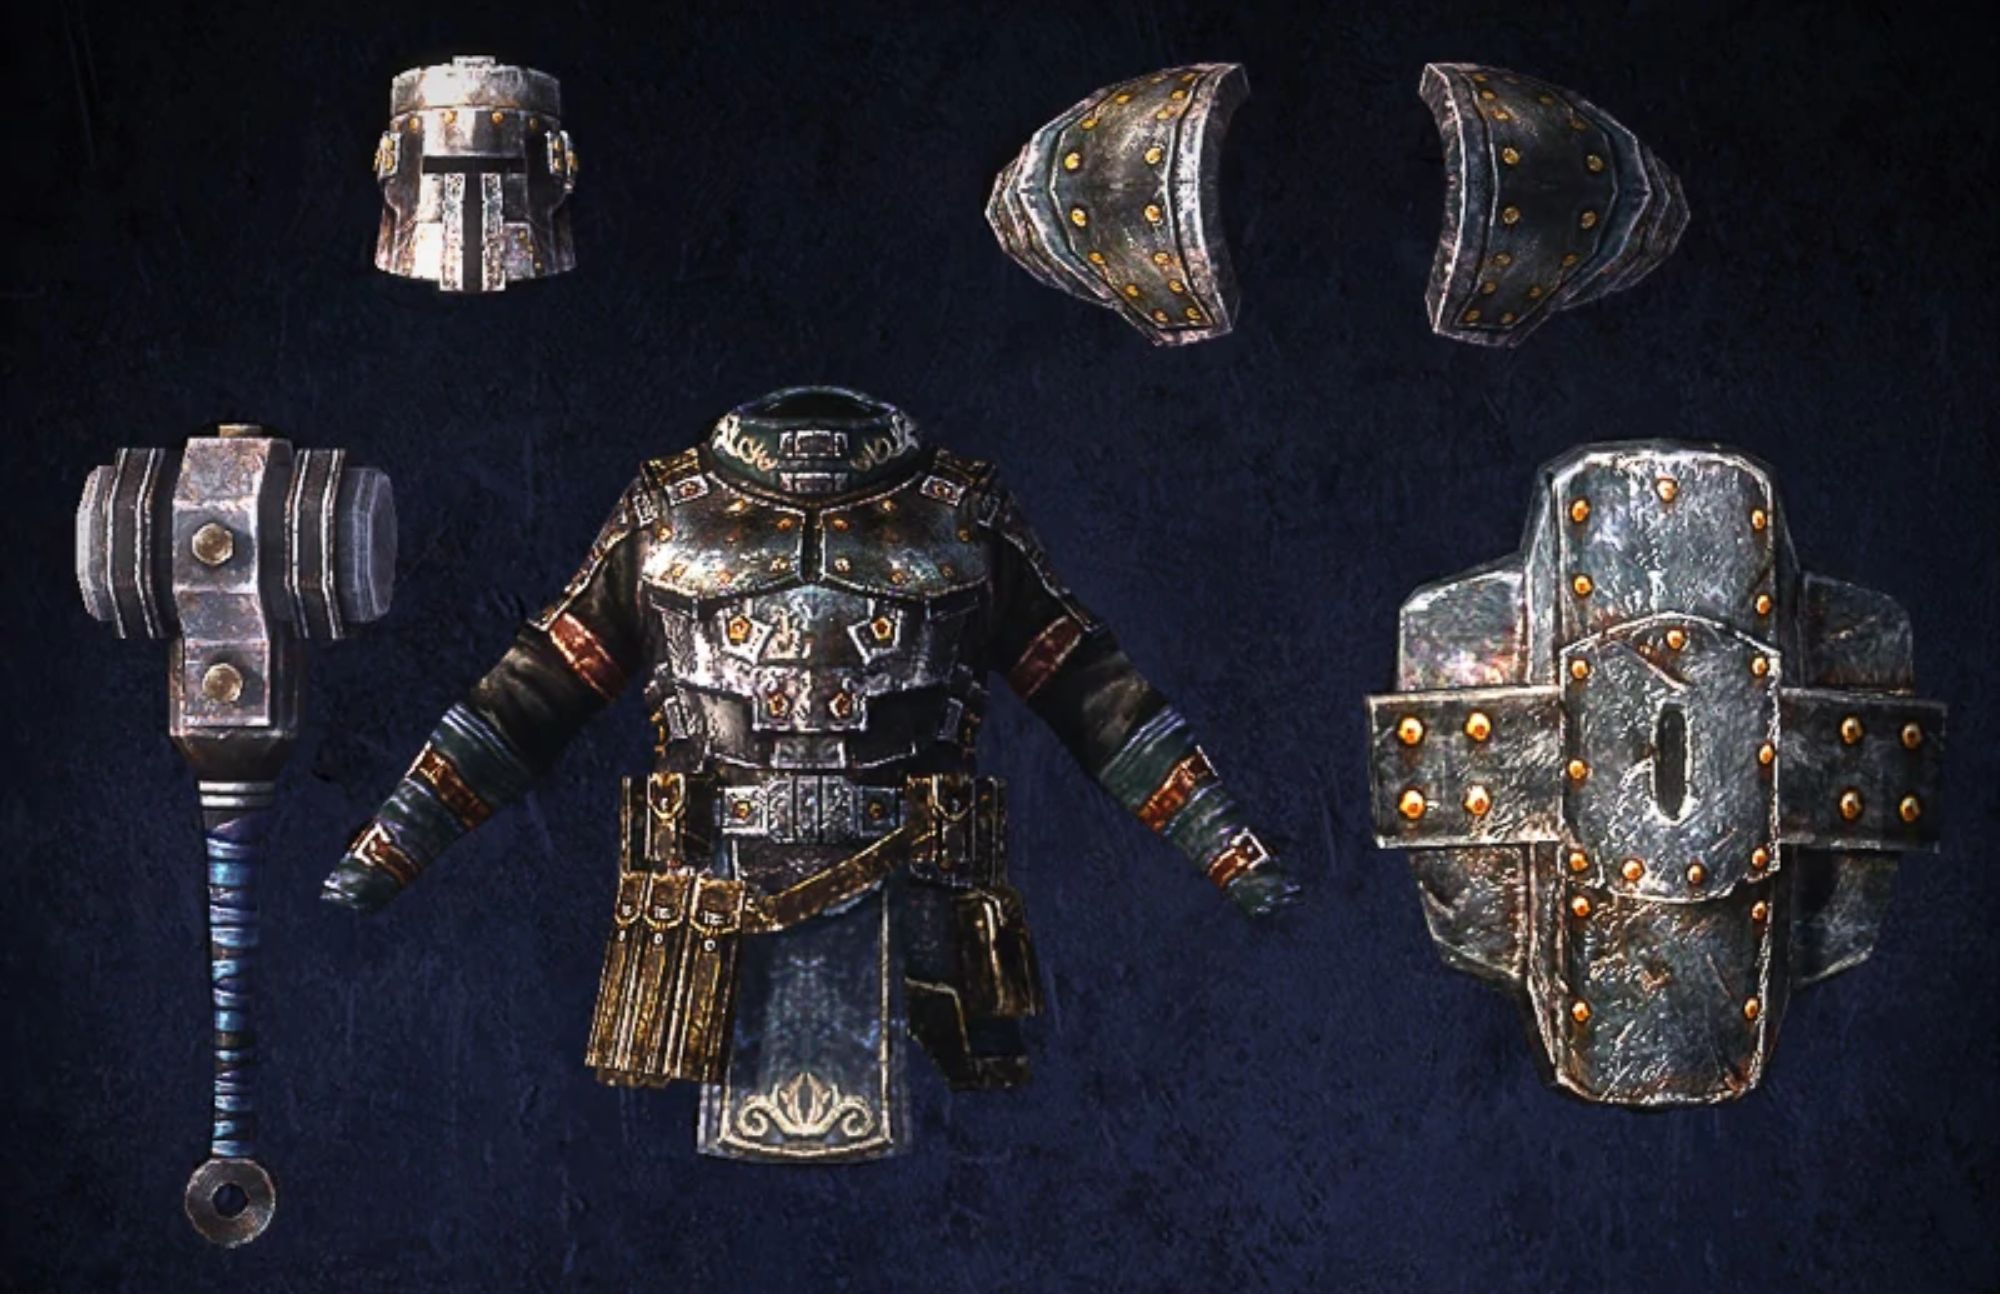 The axe, head armor, shoulder armor, and chest armor are all parts of a legendary set of armor in the picture